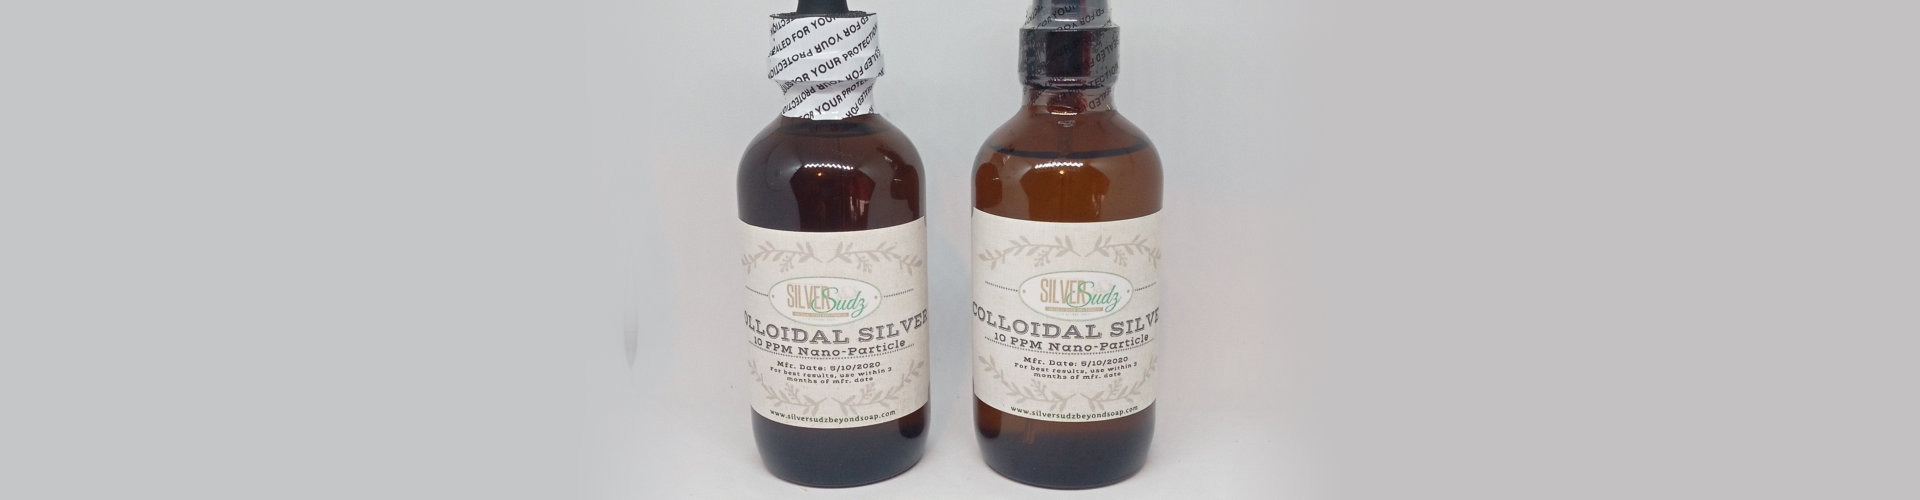 colloidal silver 10 ppm nano-particle product